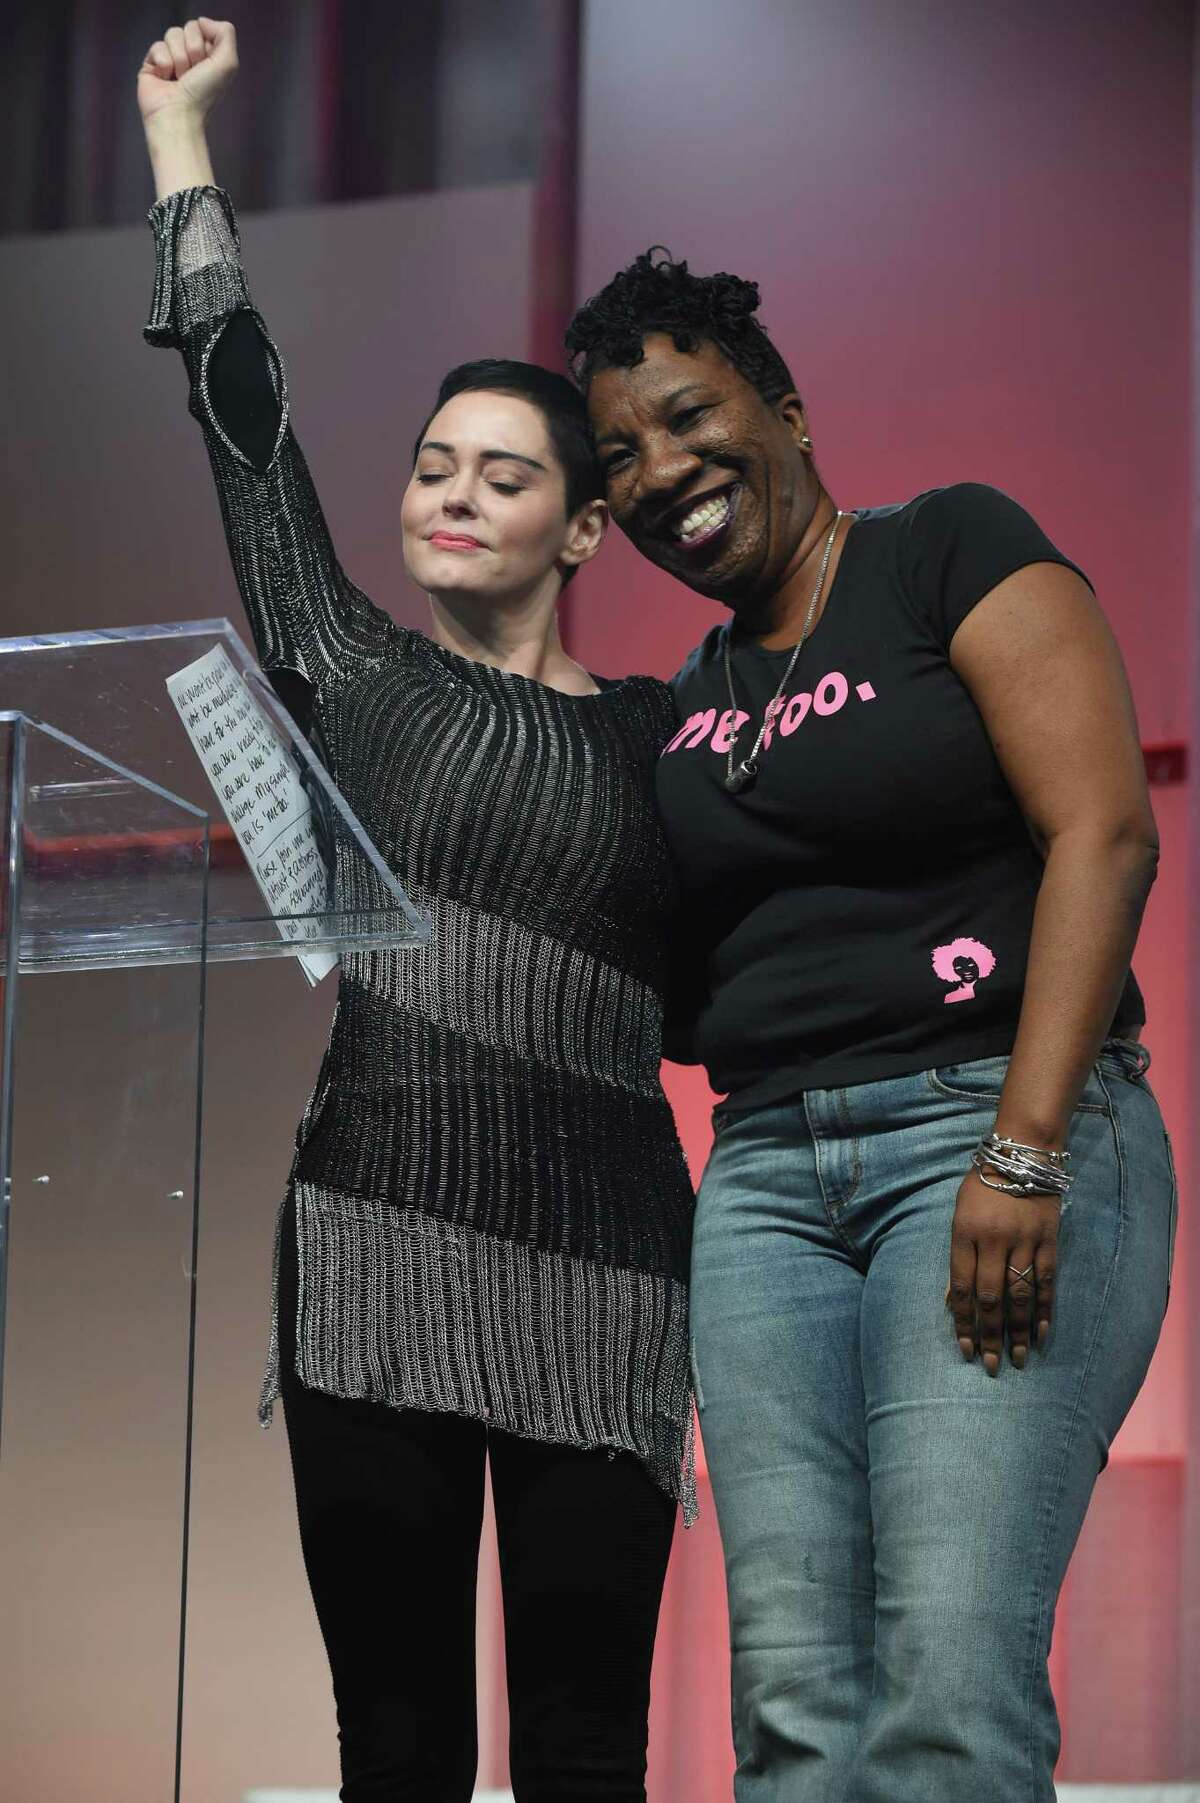 Rose McGowan and Tarana Burke stand on stage at The Women's Convention in October in Detroit. Burke started using "Me Too" a decade ago to raise awareness about sexual violence.